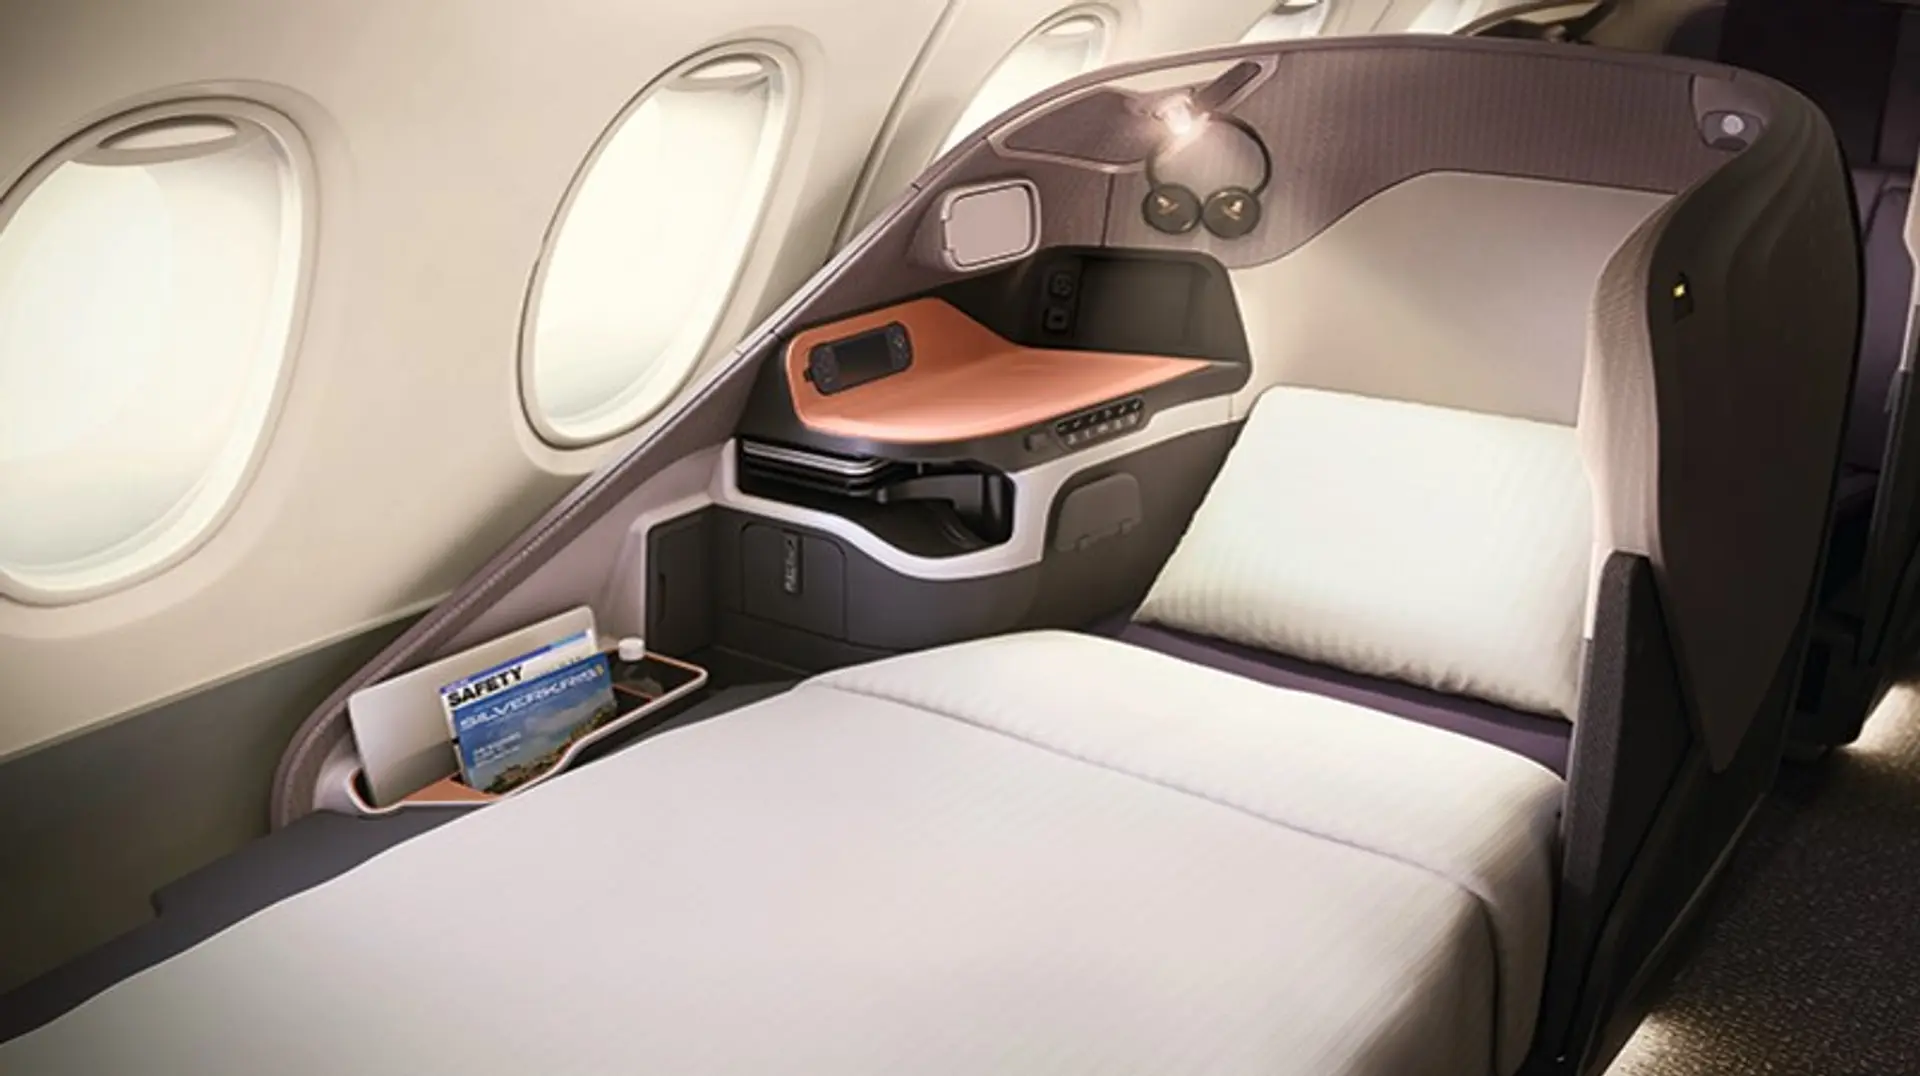 Airlines News - Singapore Airlines - unlimited free Wi-Fi in Business and First Class